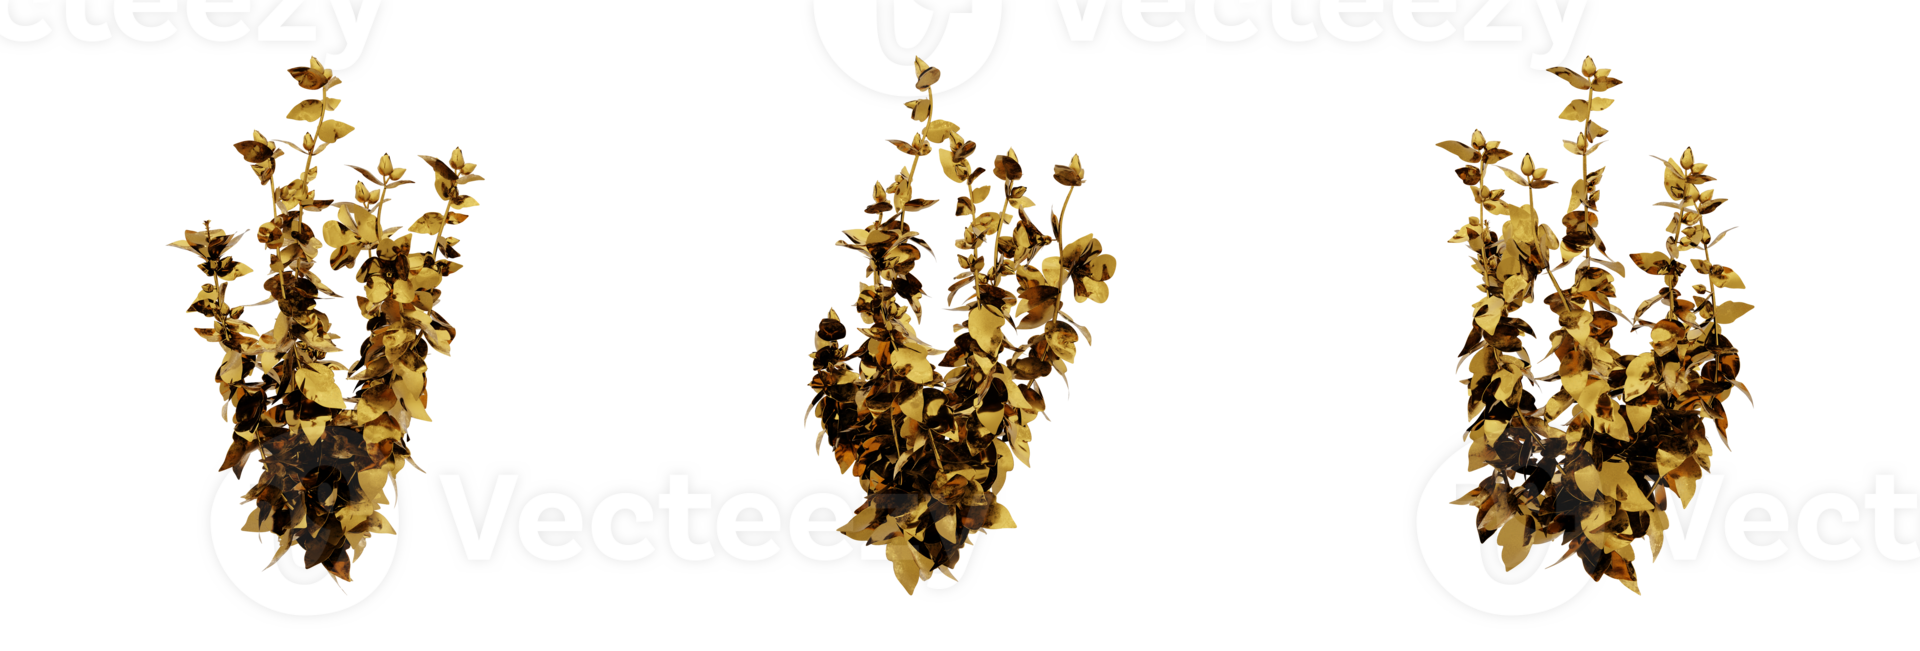 A stunning 3D rendering of a golden plant that will add richness and elegance to any design. This gold plant has a metallic finish and natural-looking leaves png